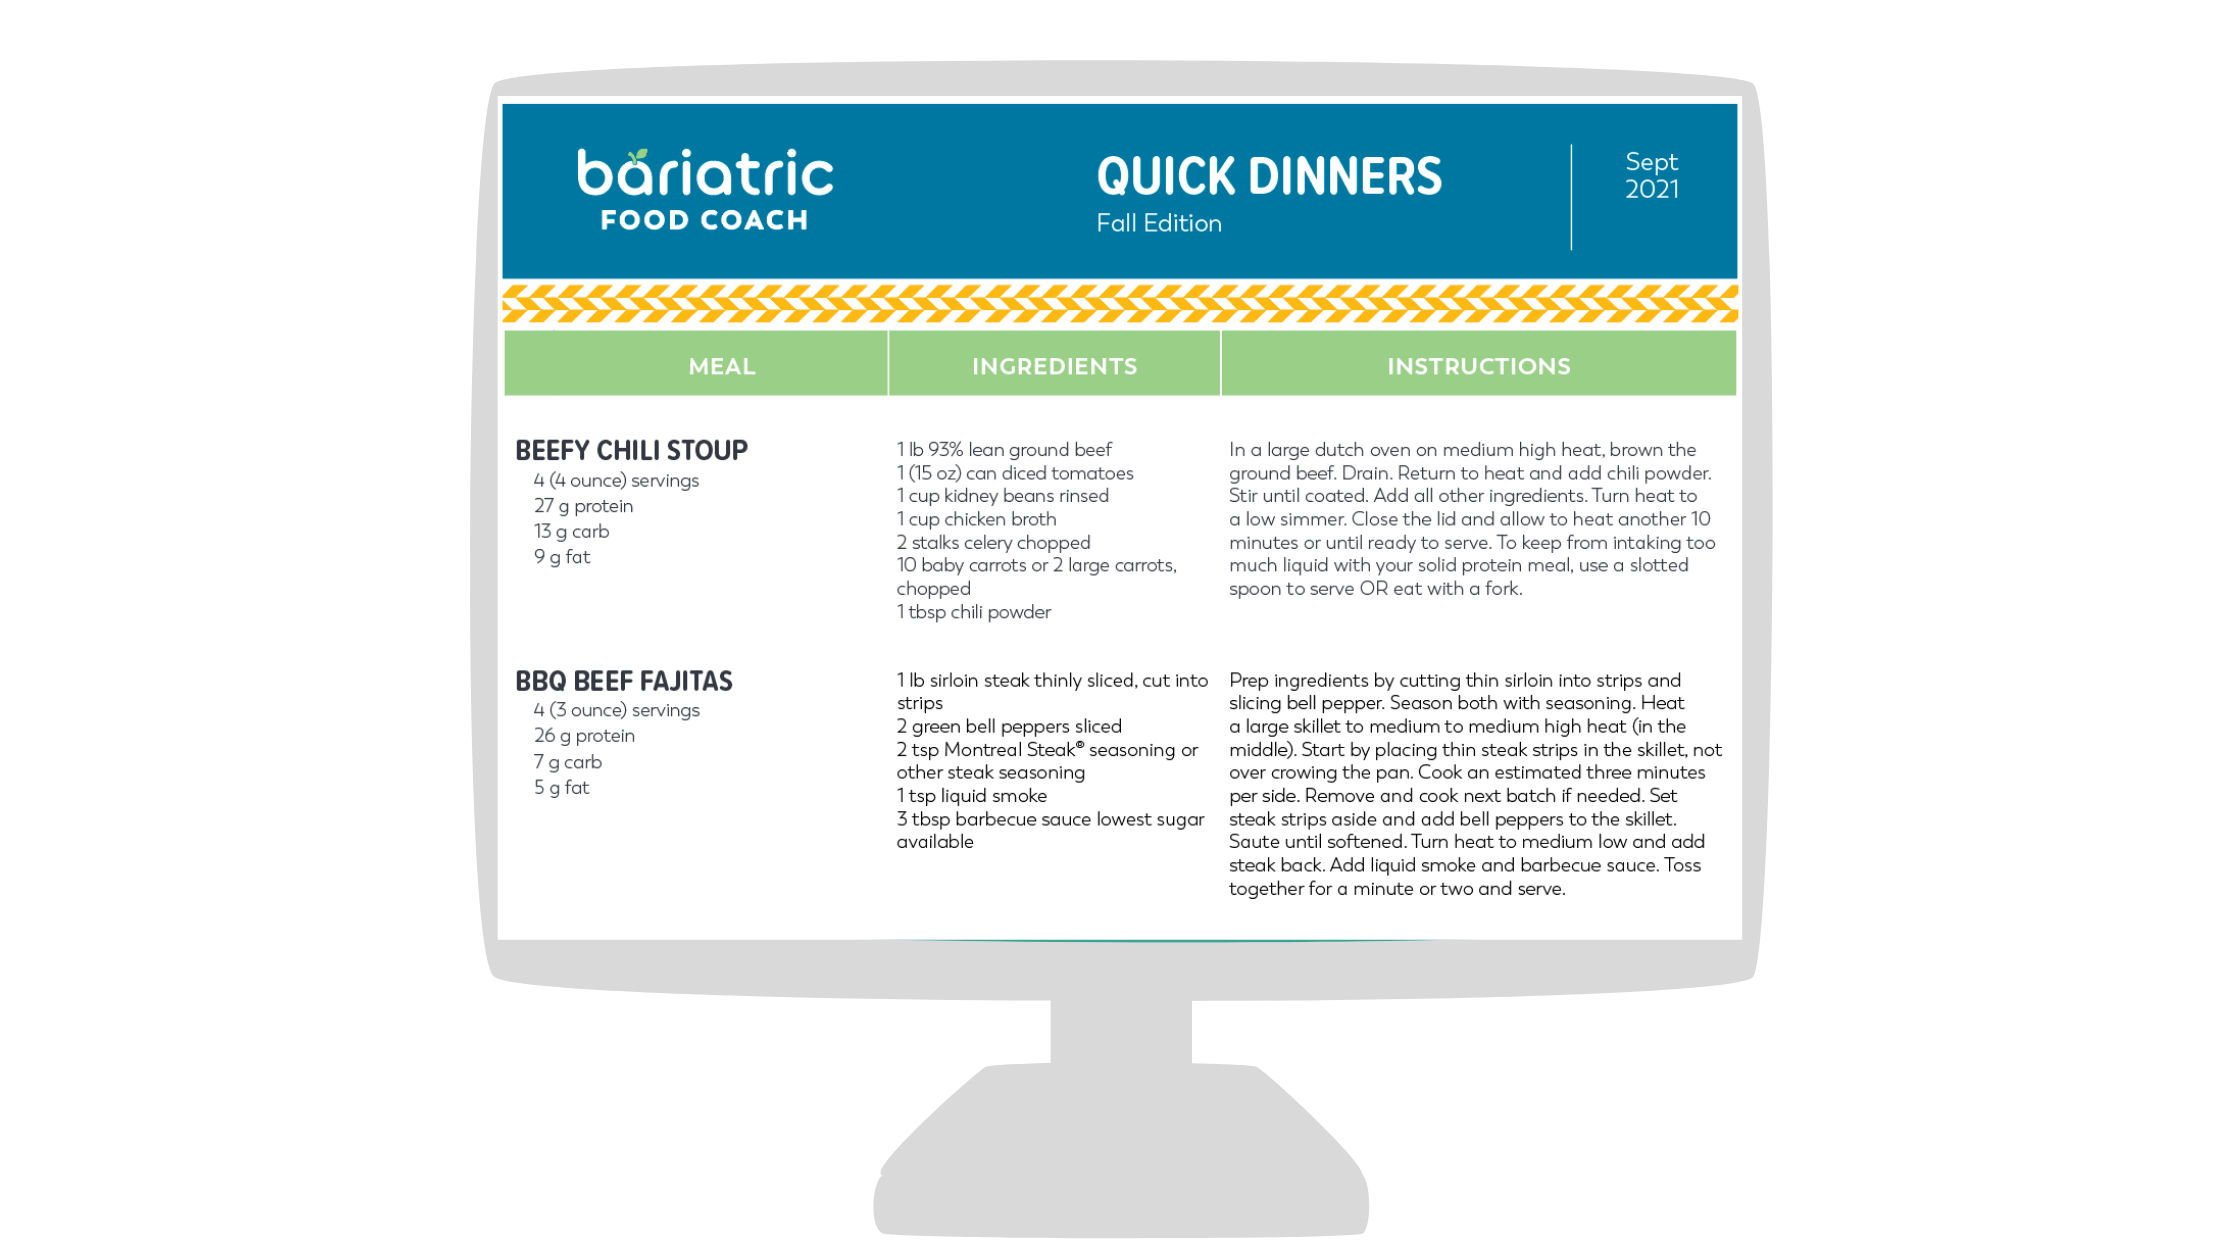 fall edition of quick dinners guide on bariatric food coach